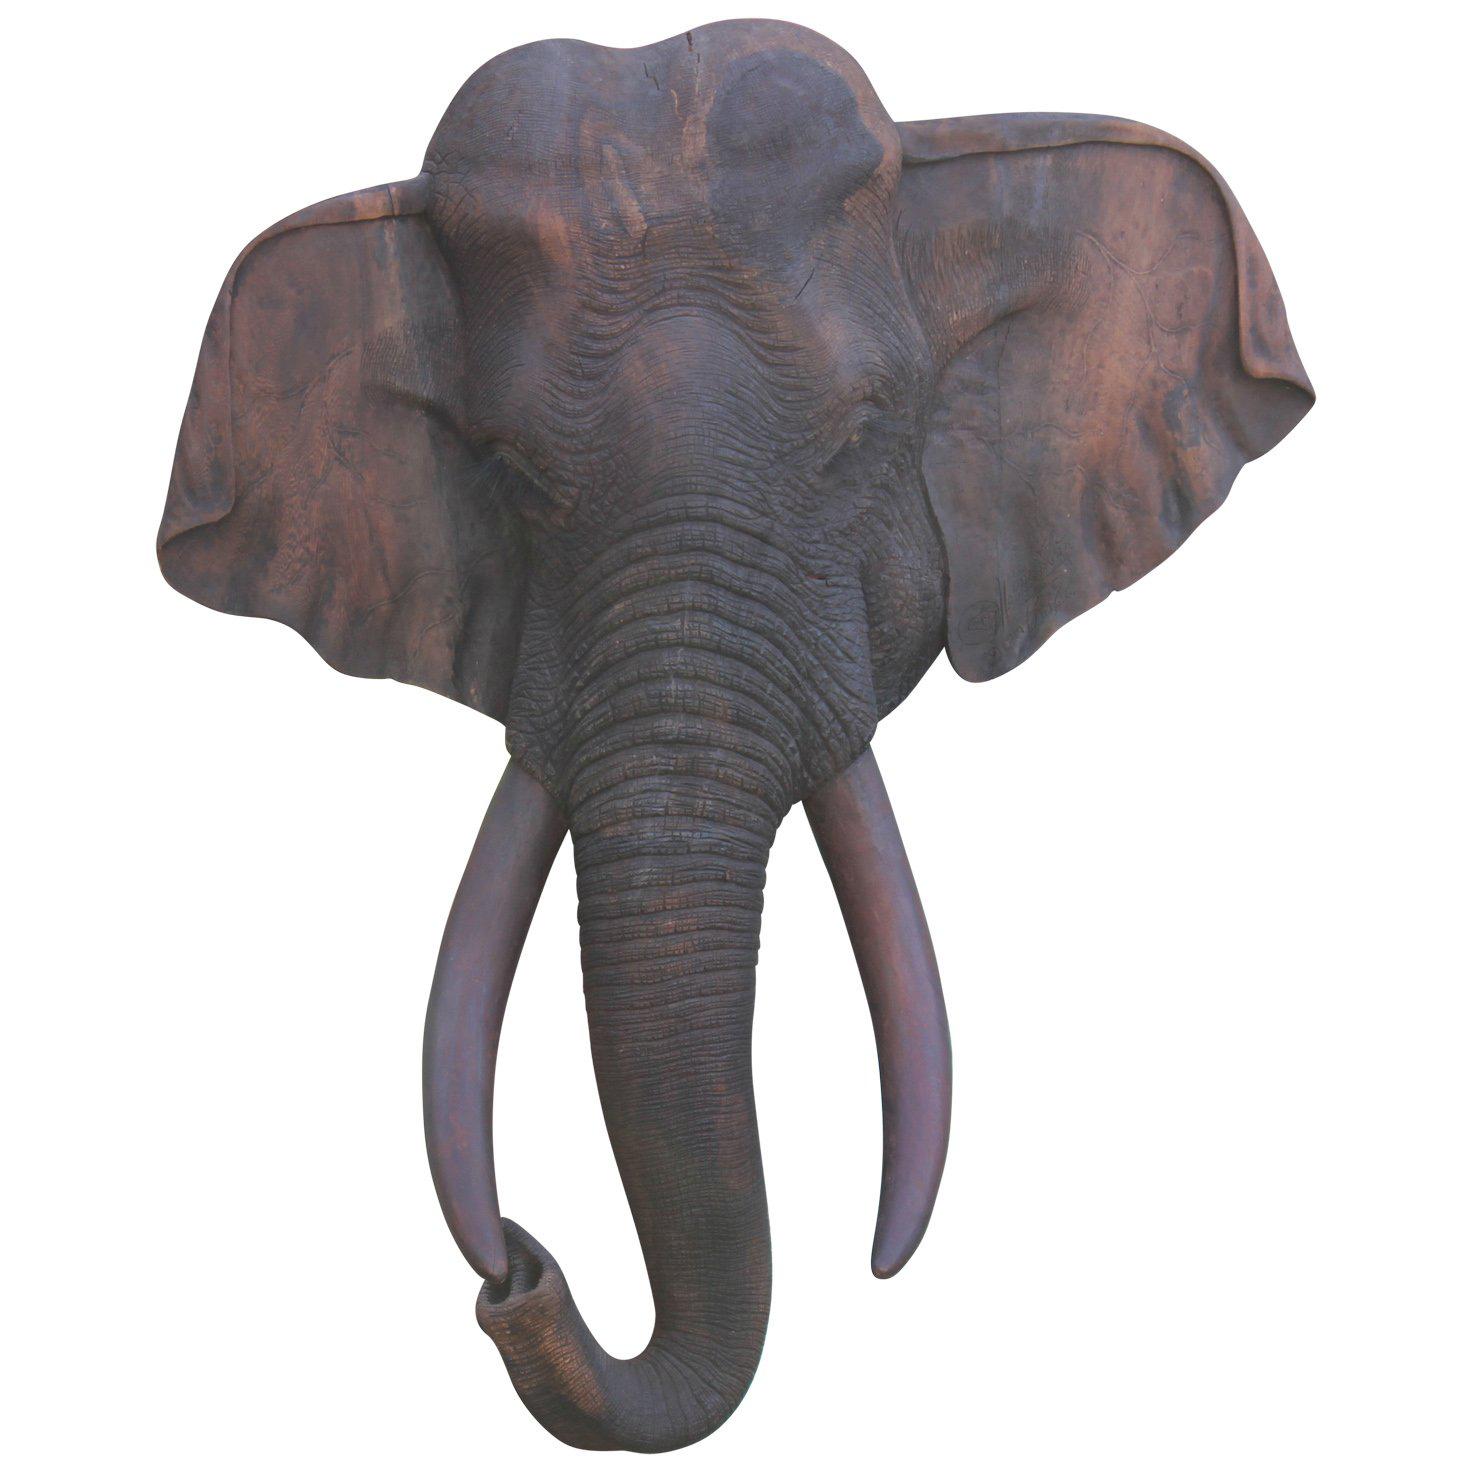 Monumental 20th Century Life-Like Carved Wooden Elephant Wall Sculpture